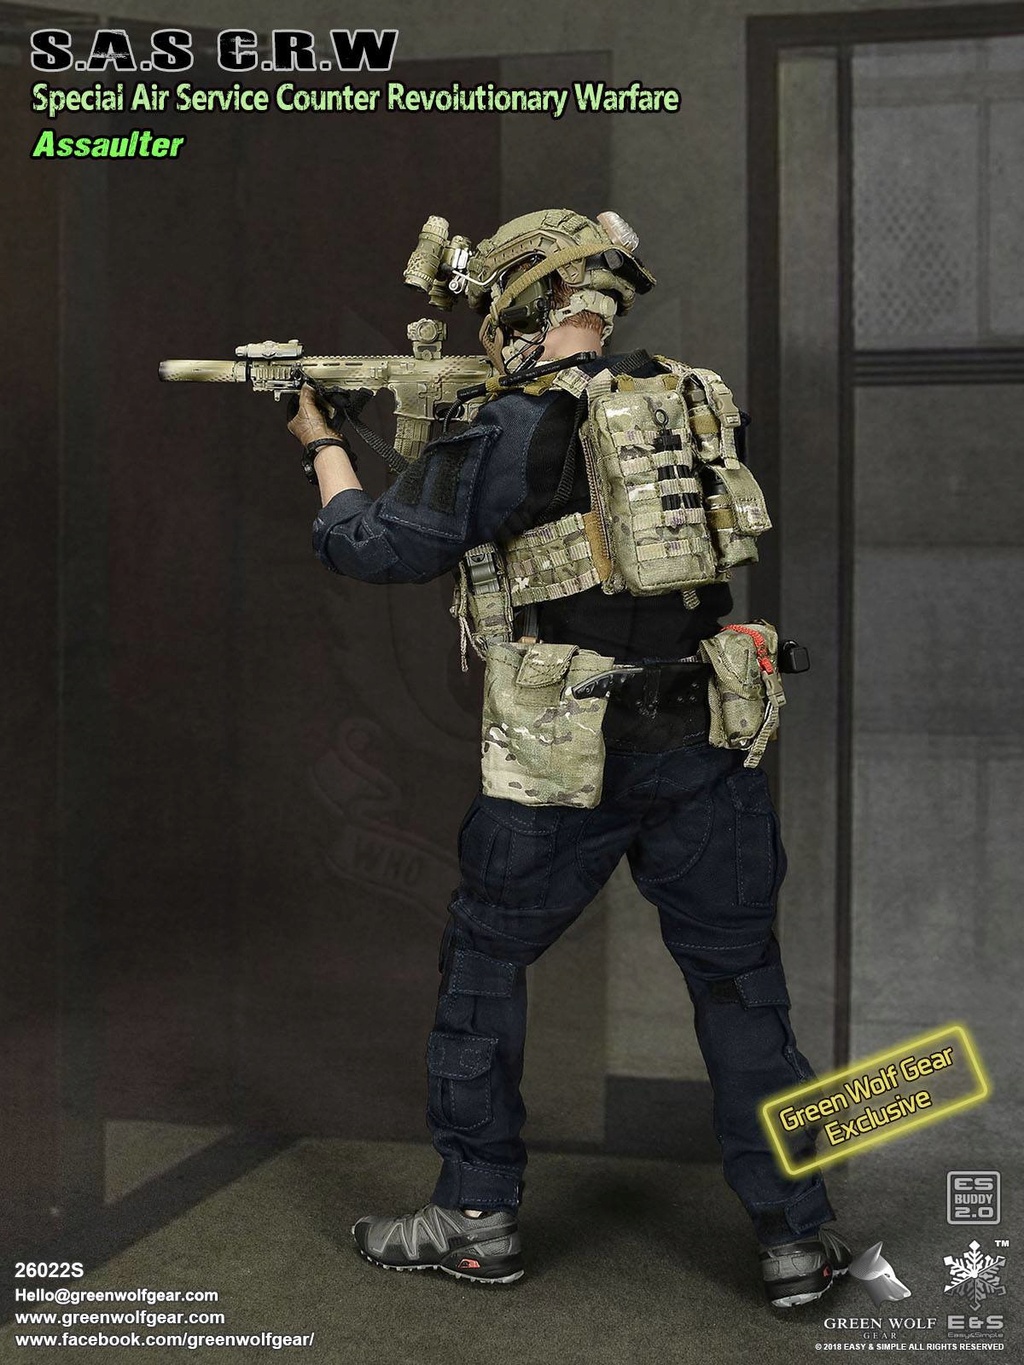 NEW PRODUCT: Easy & Simple SAS (Special Air Service) CRW (Counter Revolutionary Warfare)  Assaulter Exclusive Figure 715